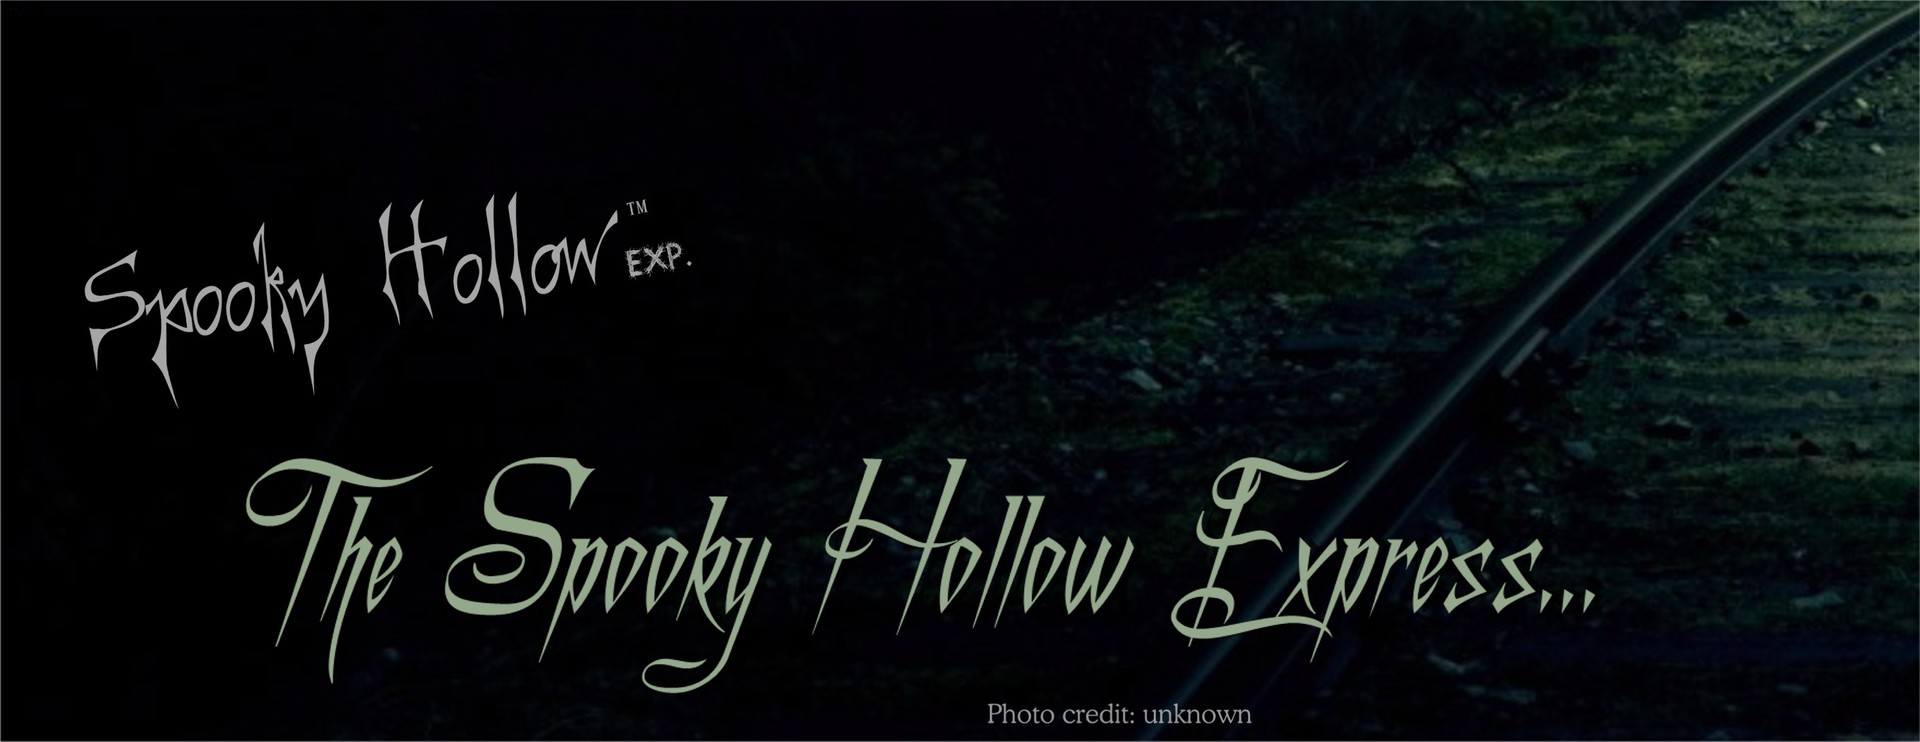 Spooky Hollow Experience 2005 title